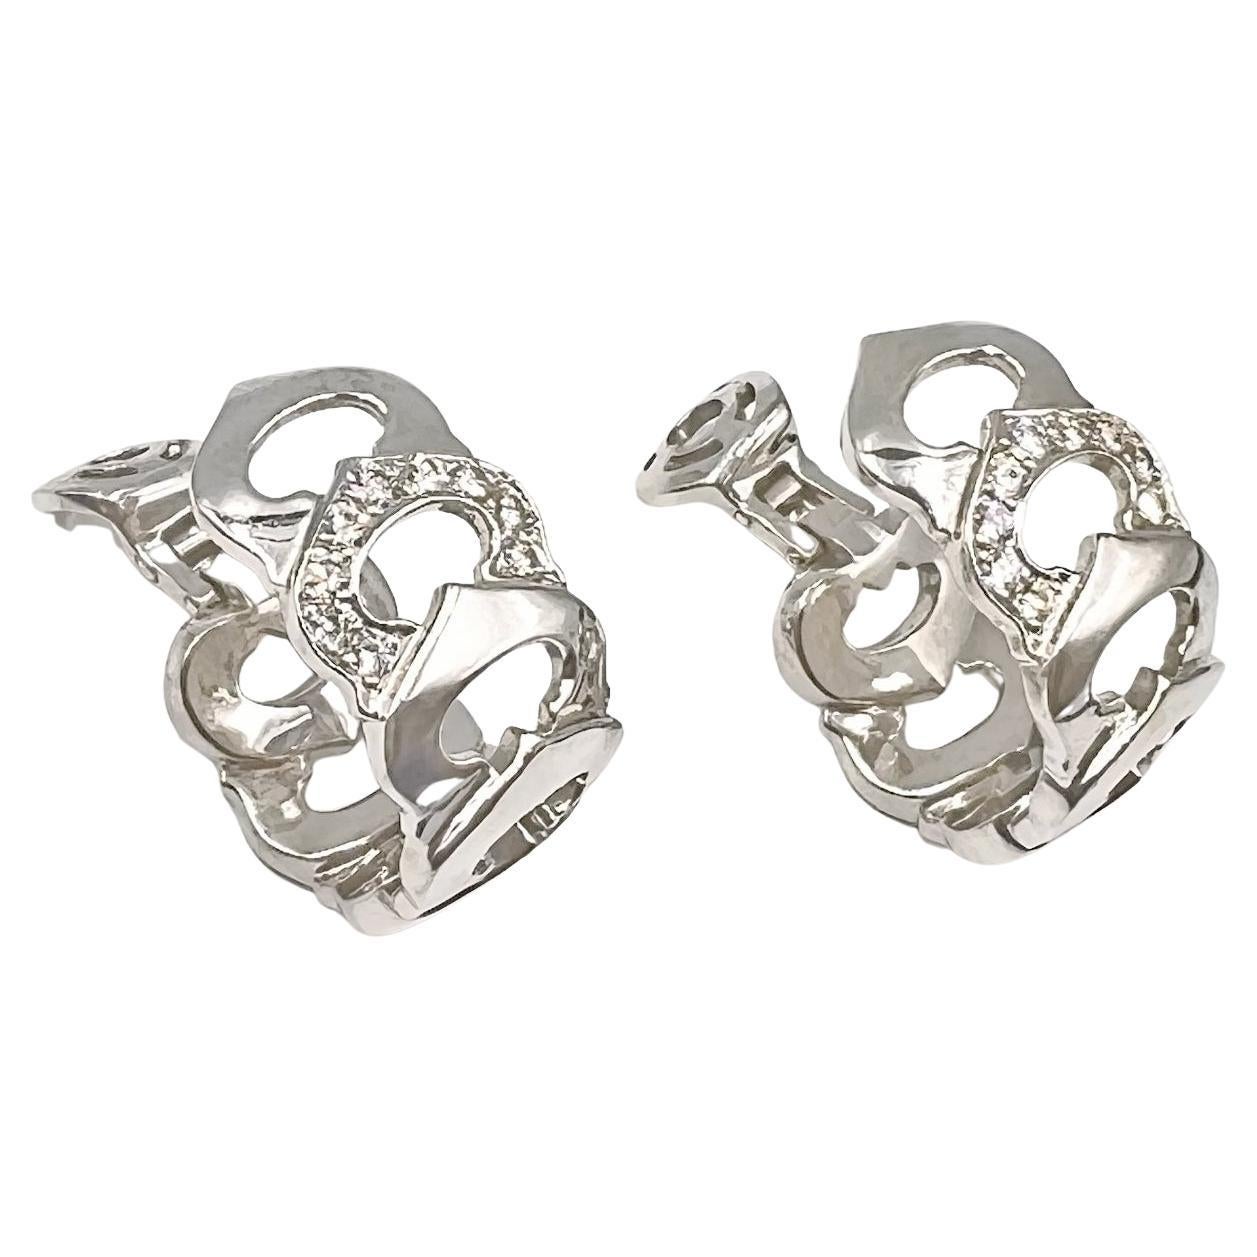 'C' de Cartier 18k white gold and diamond earrings.  Interlocking 'C' motif links in polished 18k white gold accented by a single link at center set with round brilliant-cut diamonds.  Diamonds weighing 1.26 total carats (E-F color, VVS-VS clarity).